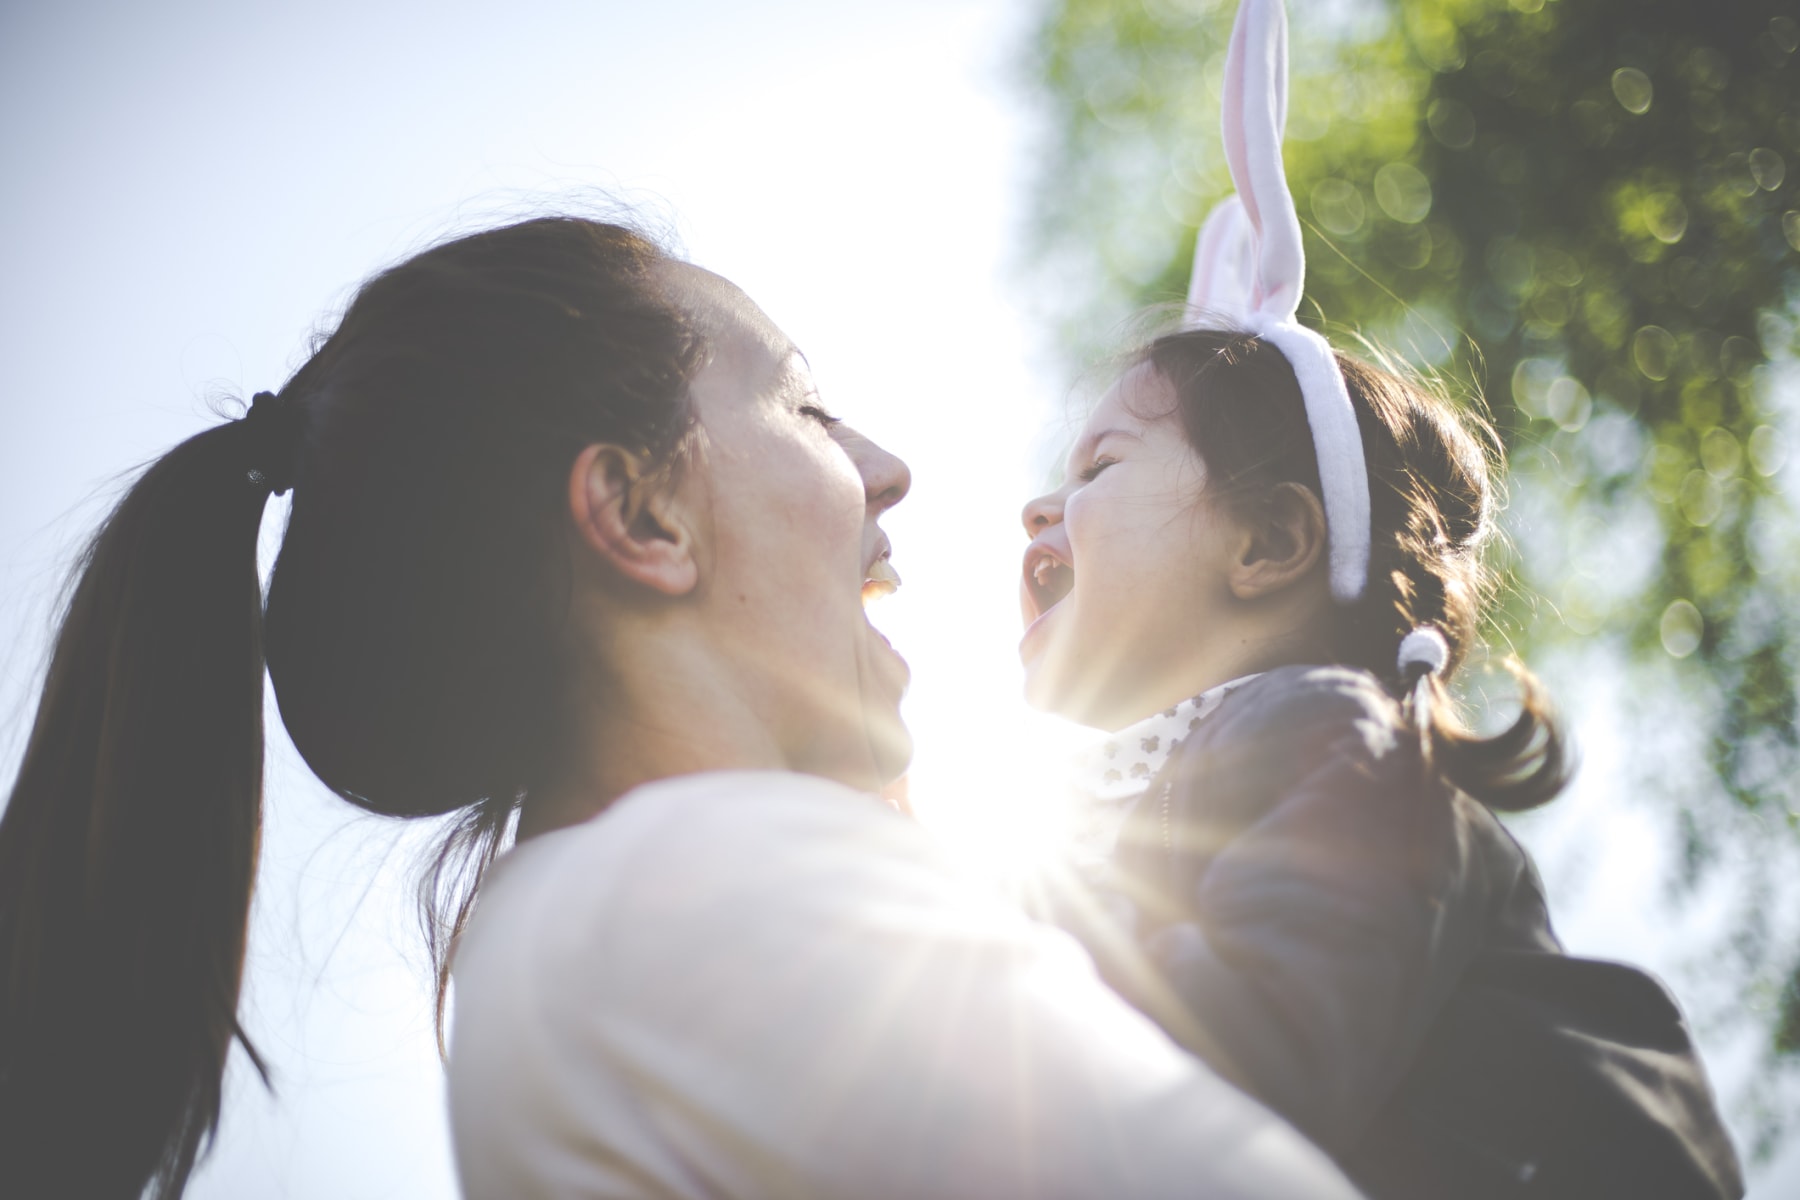 Woman holds child wearing bunny ears.